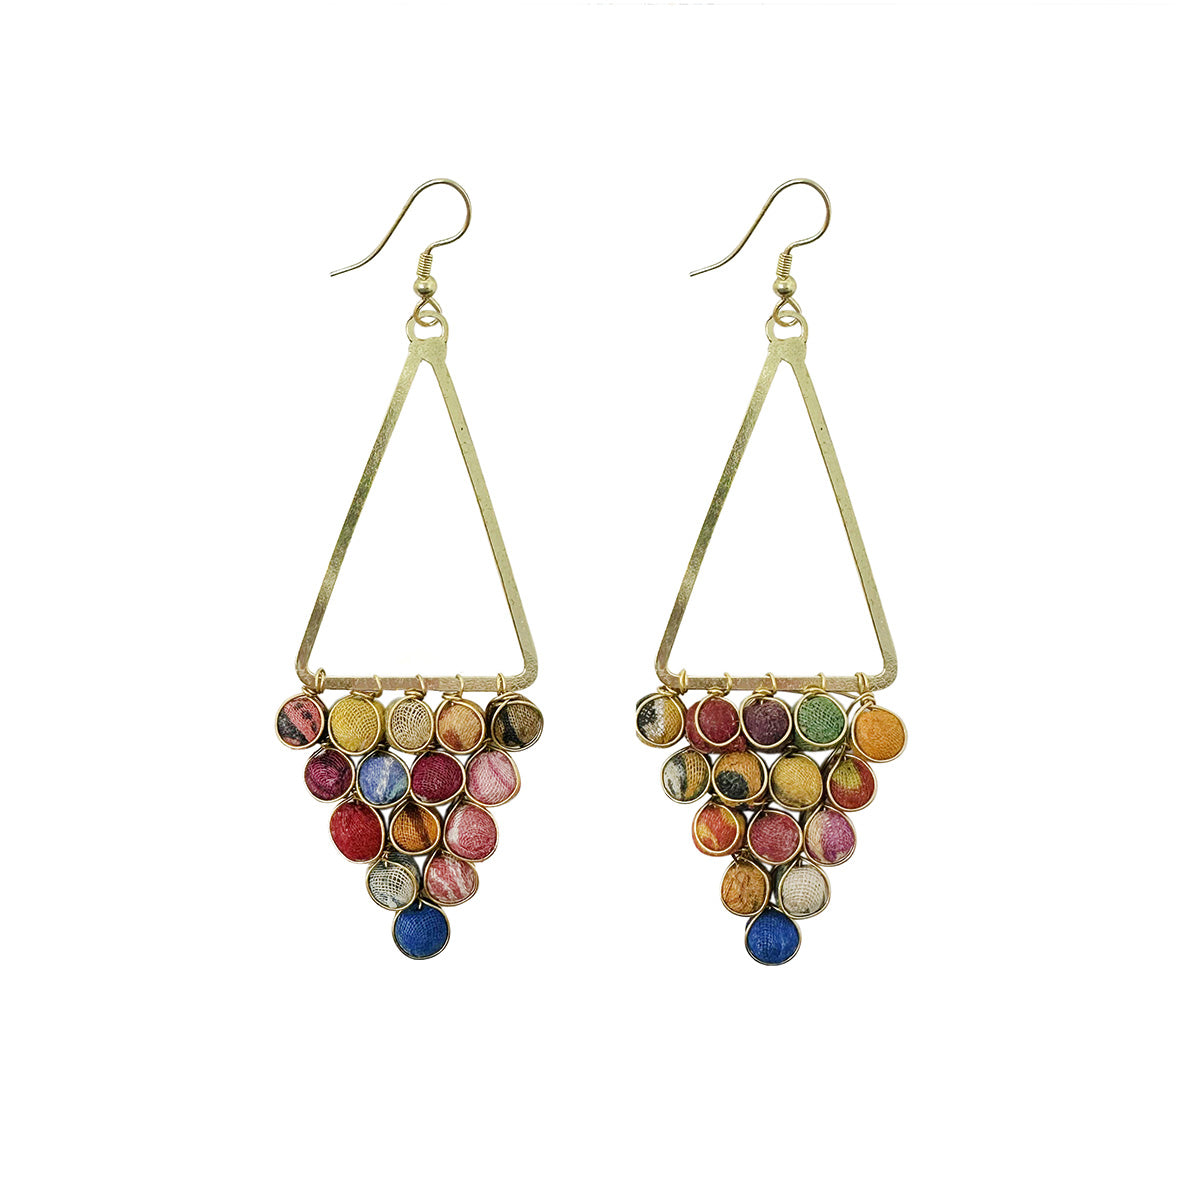 A triangle made from textile-wrapped beads and gold wire hands from a golden triangle frame to form these earrings.